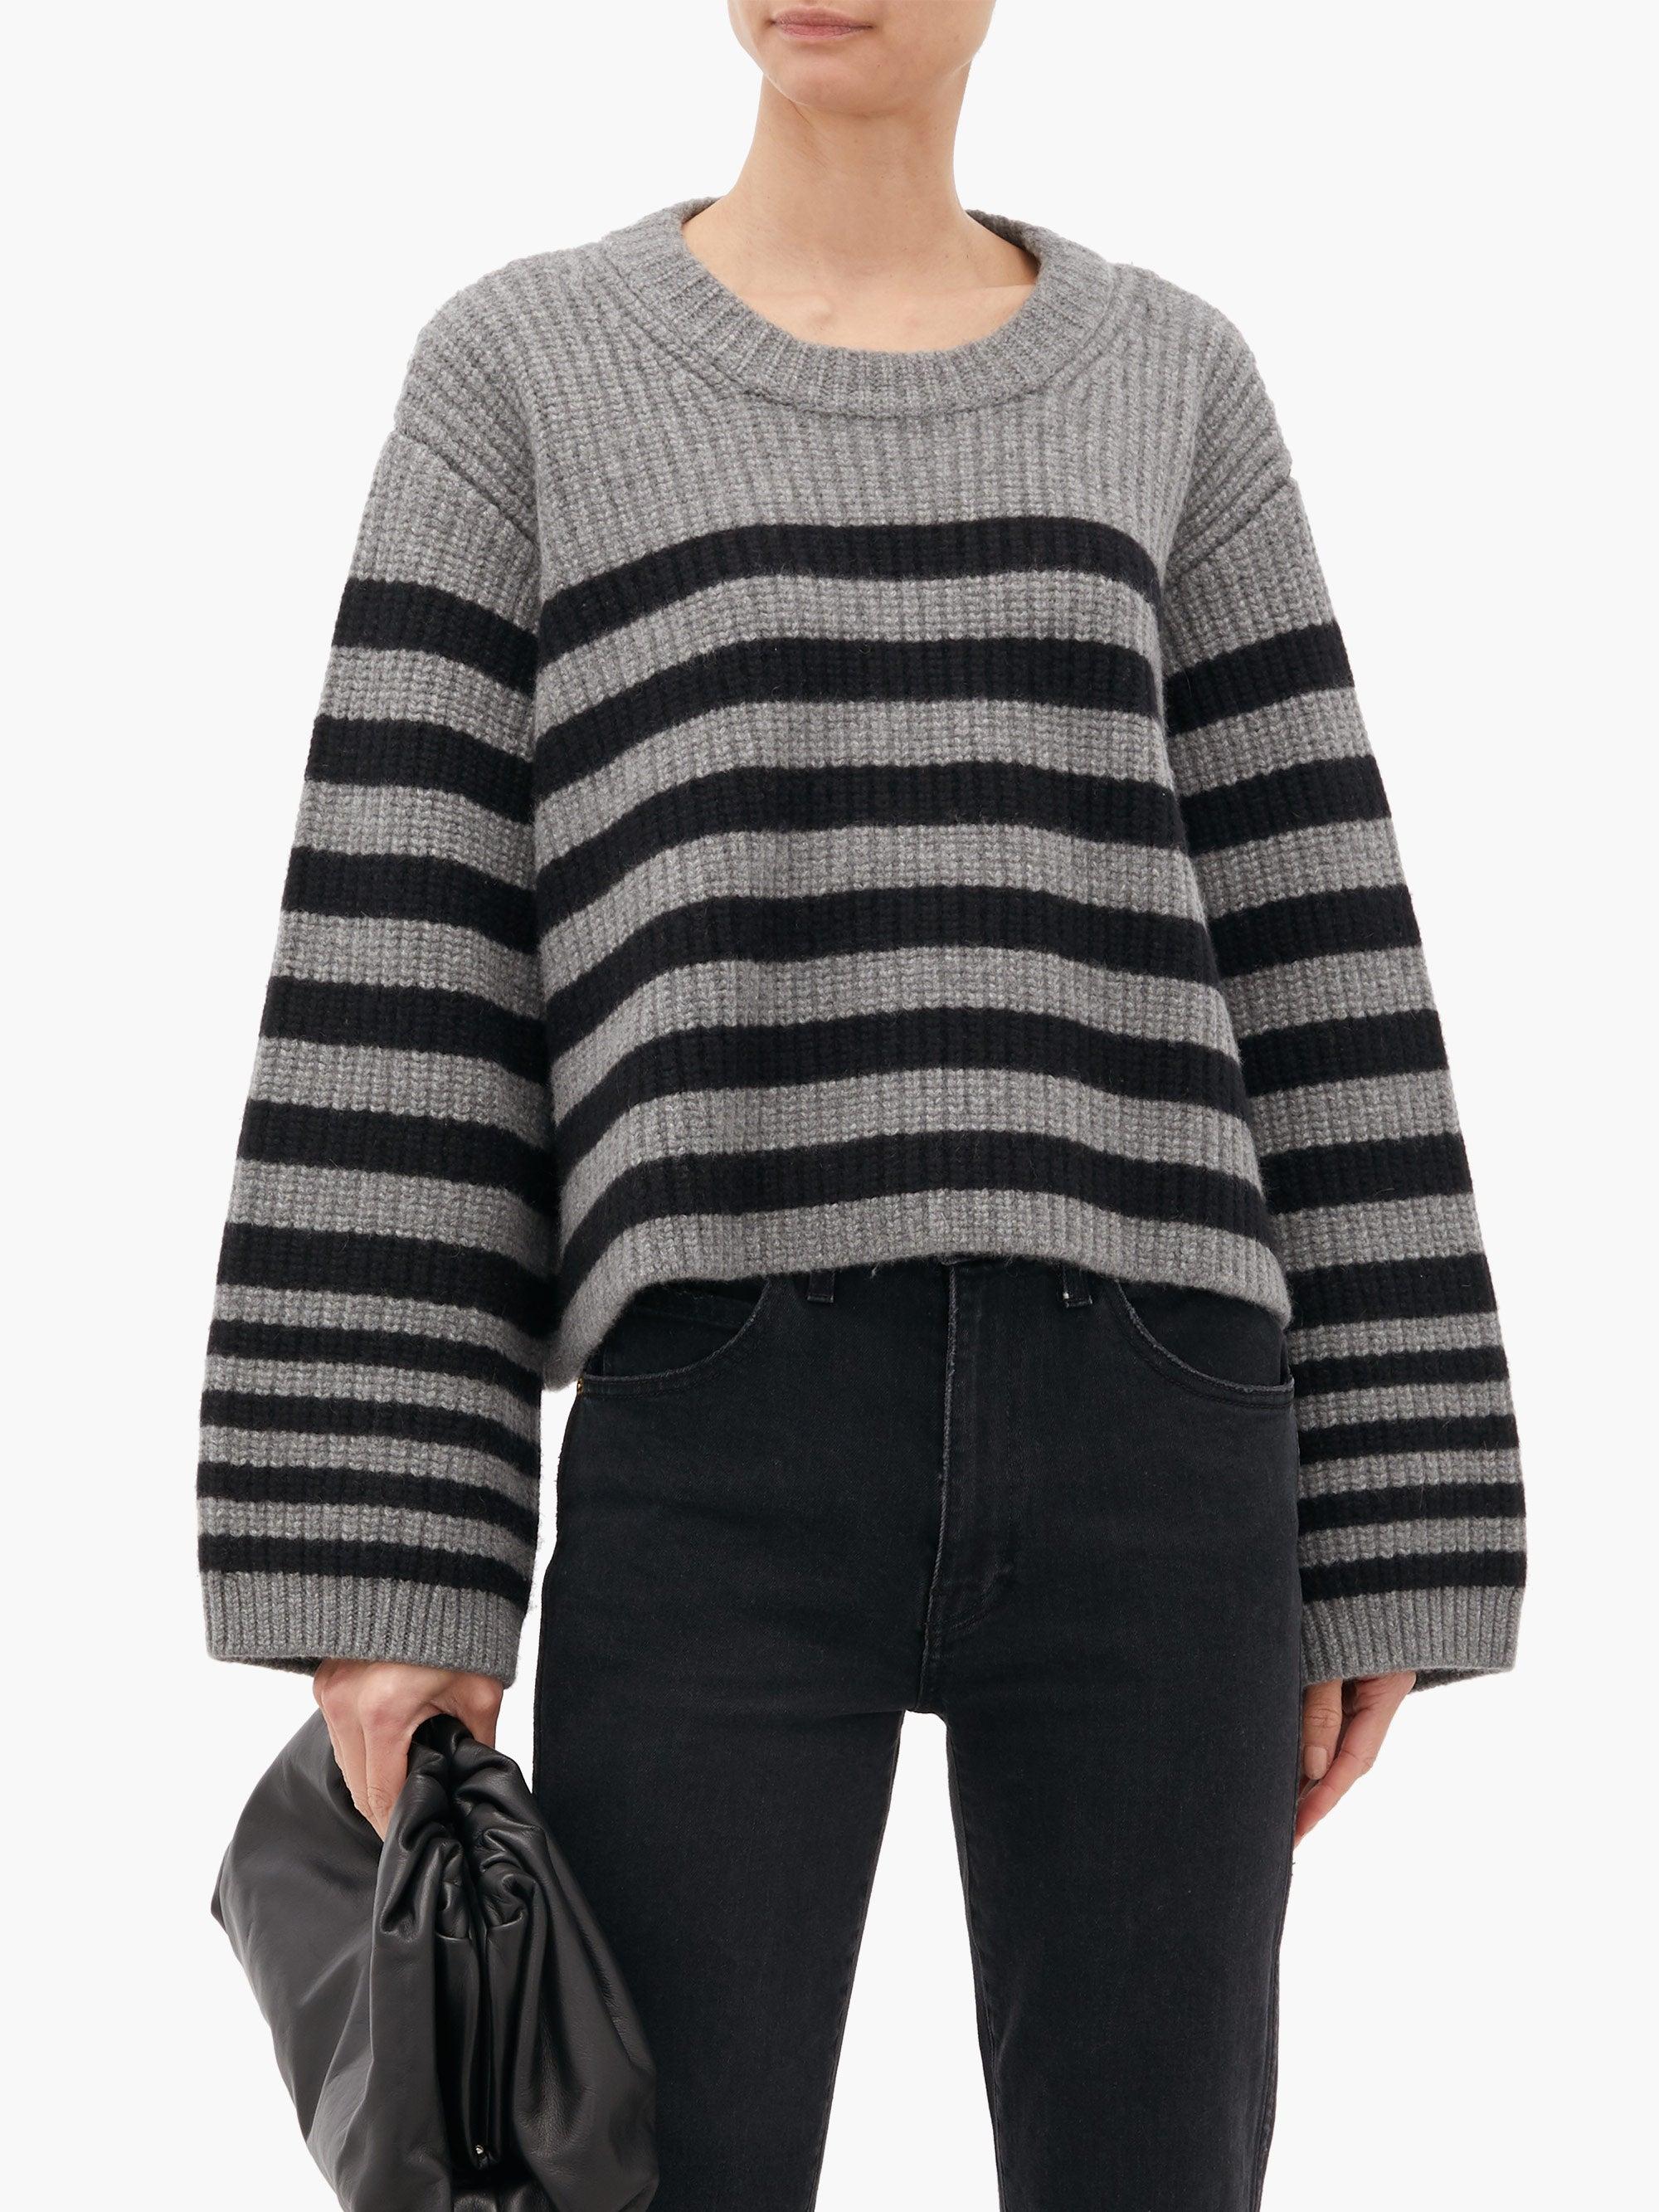 Khaite Striped Cashmere Sweater in Gray - Lyst